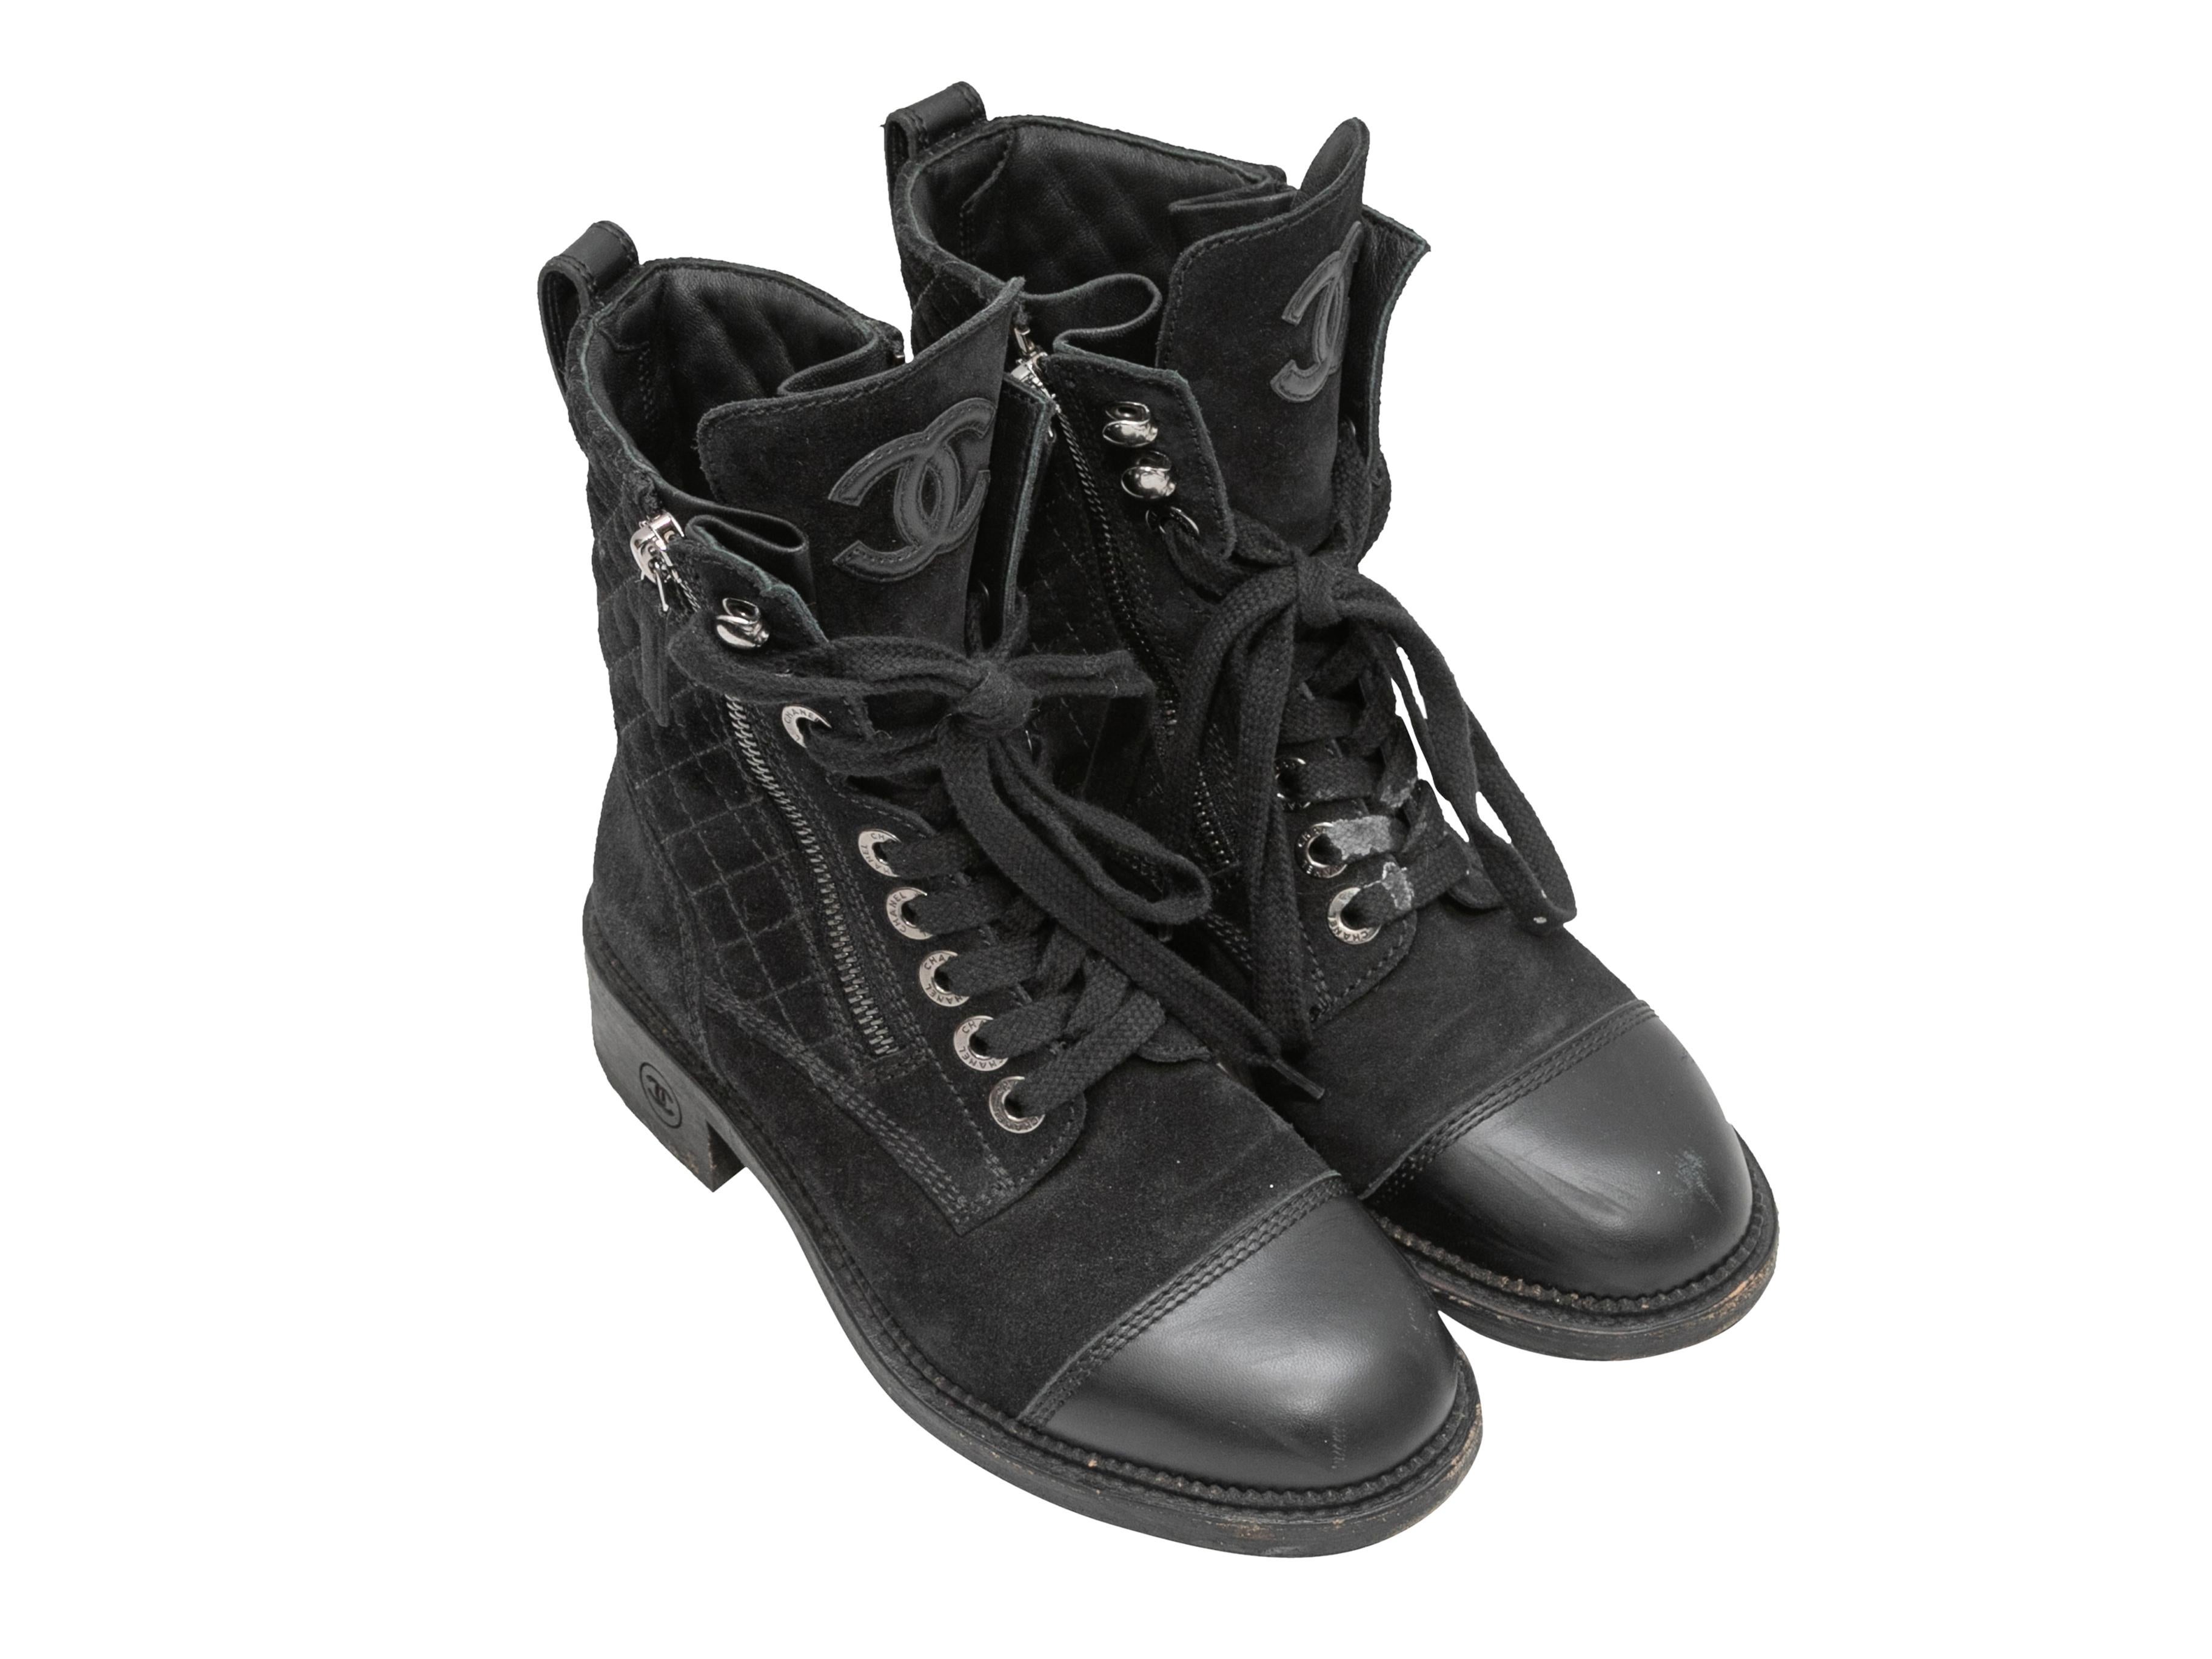 Black quilted suede and leather cap-toe combat boots by Chanel. Lug soles. Stacked heels. Lace-up detailing at tops. Zip closures at sides. 6